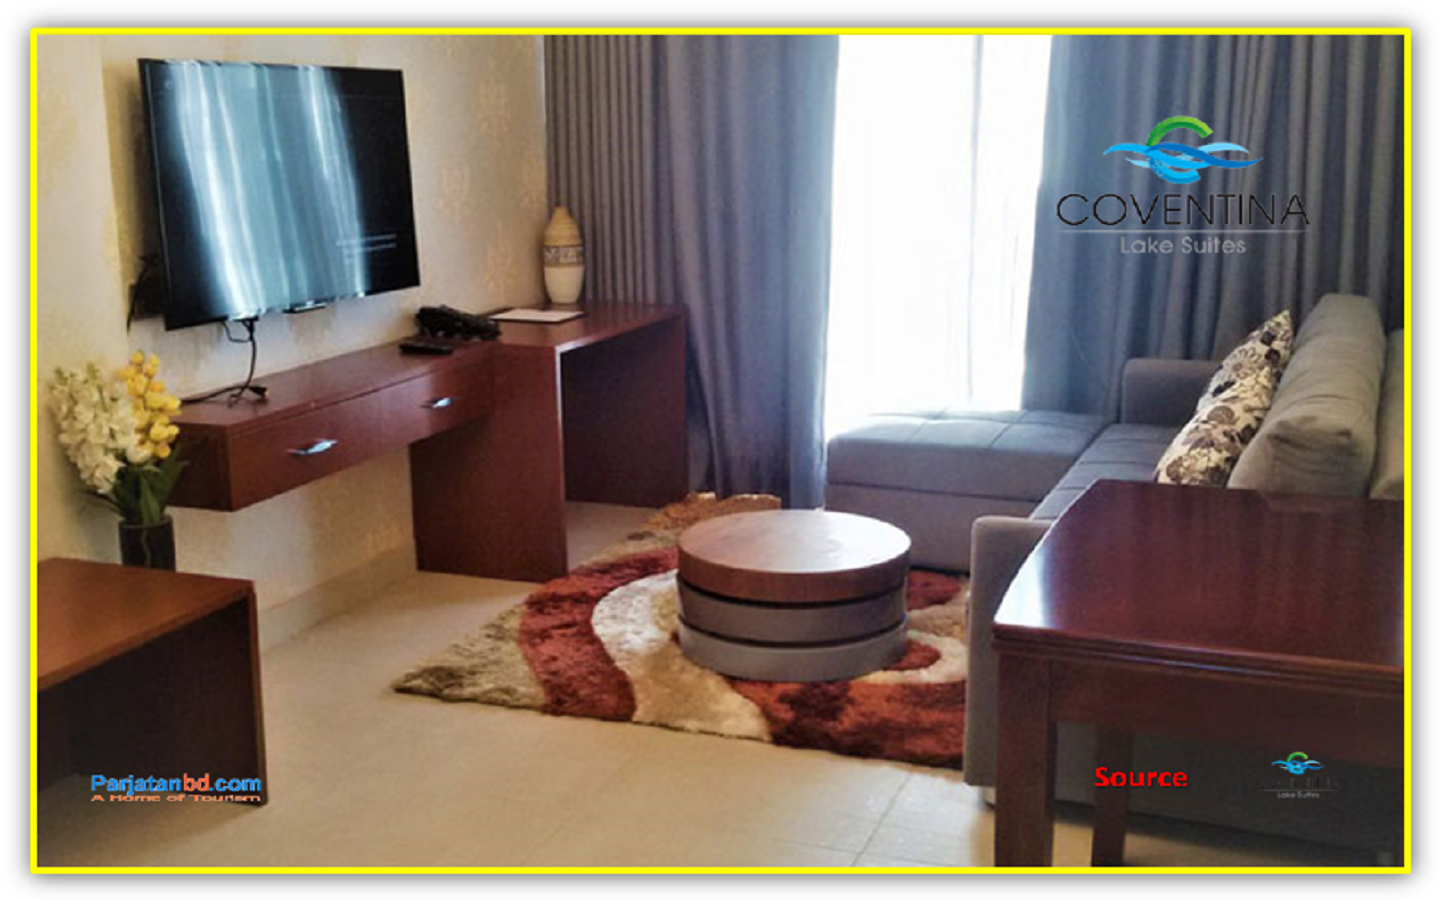 Room Executive Suites -1, Coventina Lake Suites- Serviced Apartments, Banani